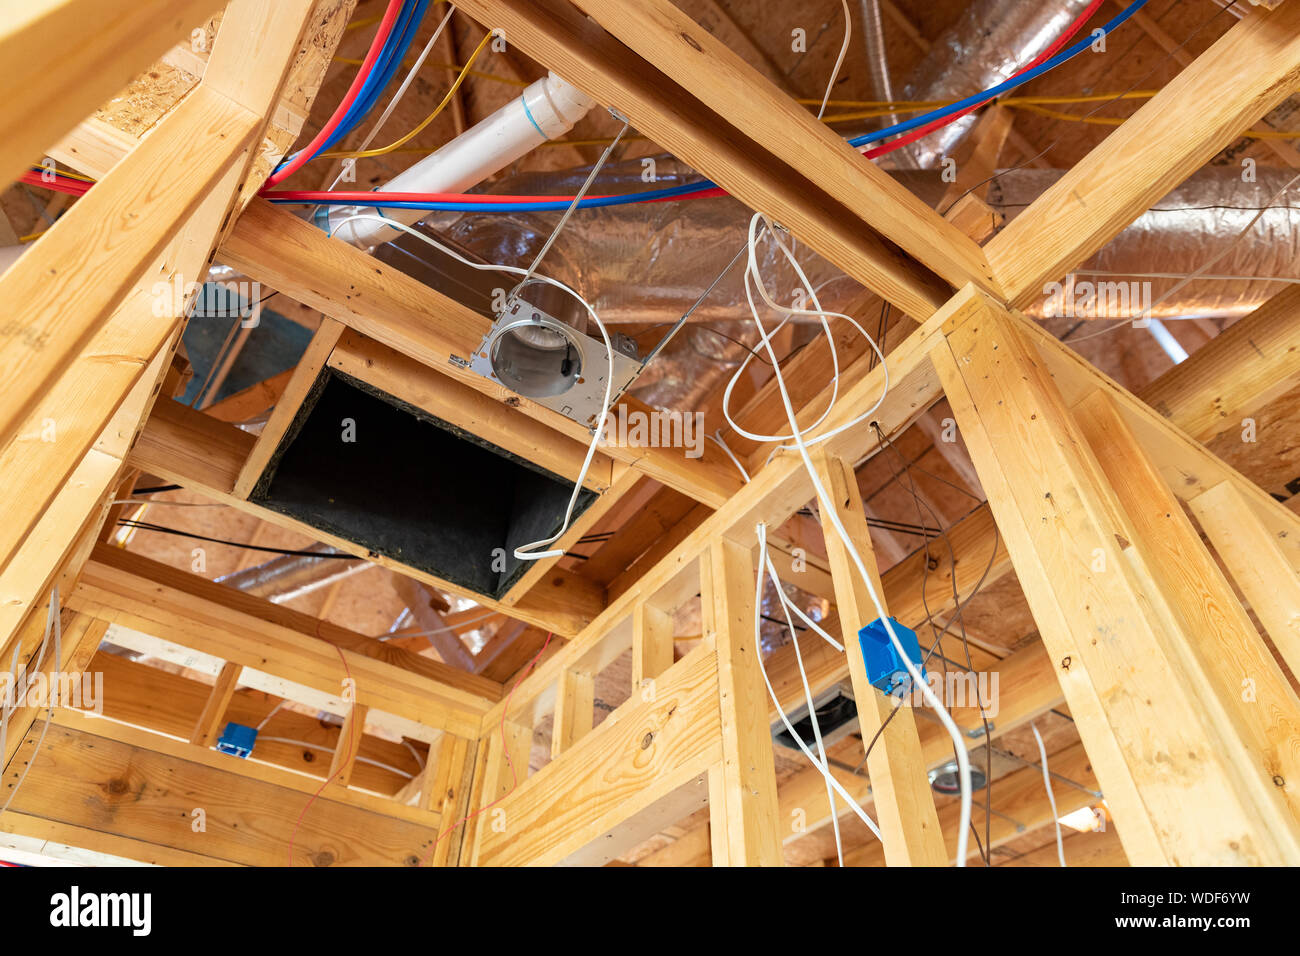 Air Conditioner return and wiring in new home construction Stock Photo